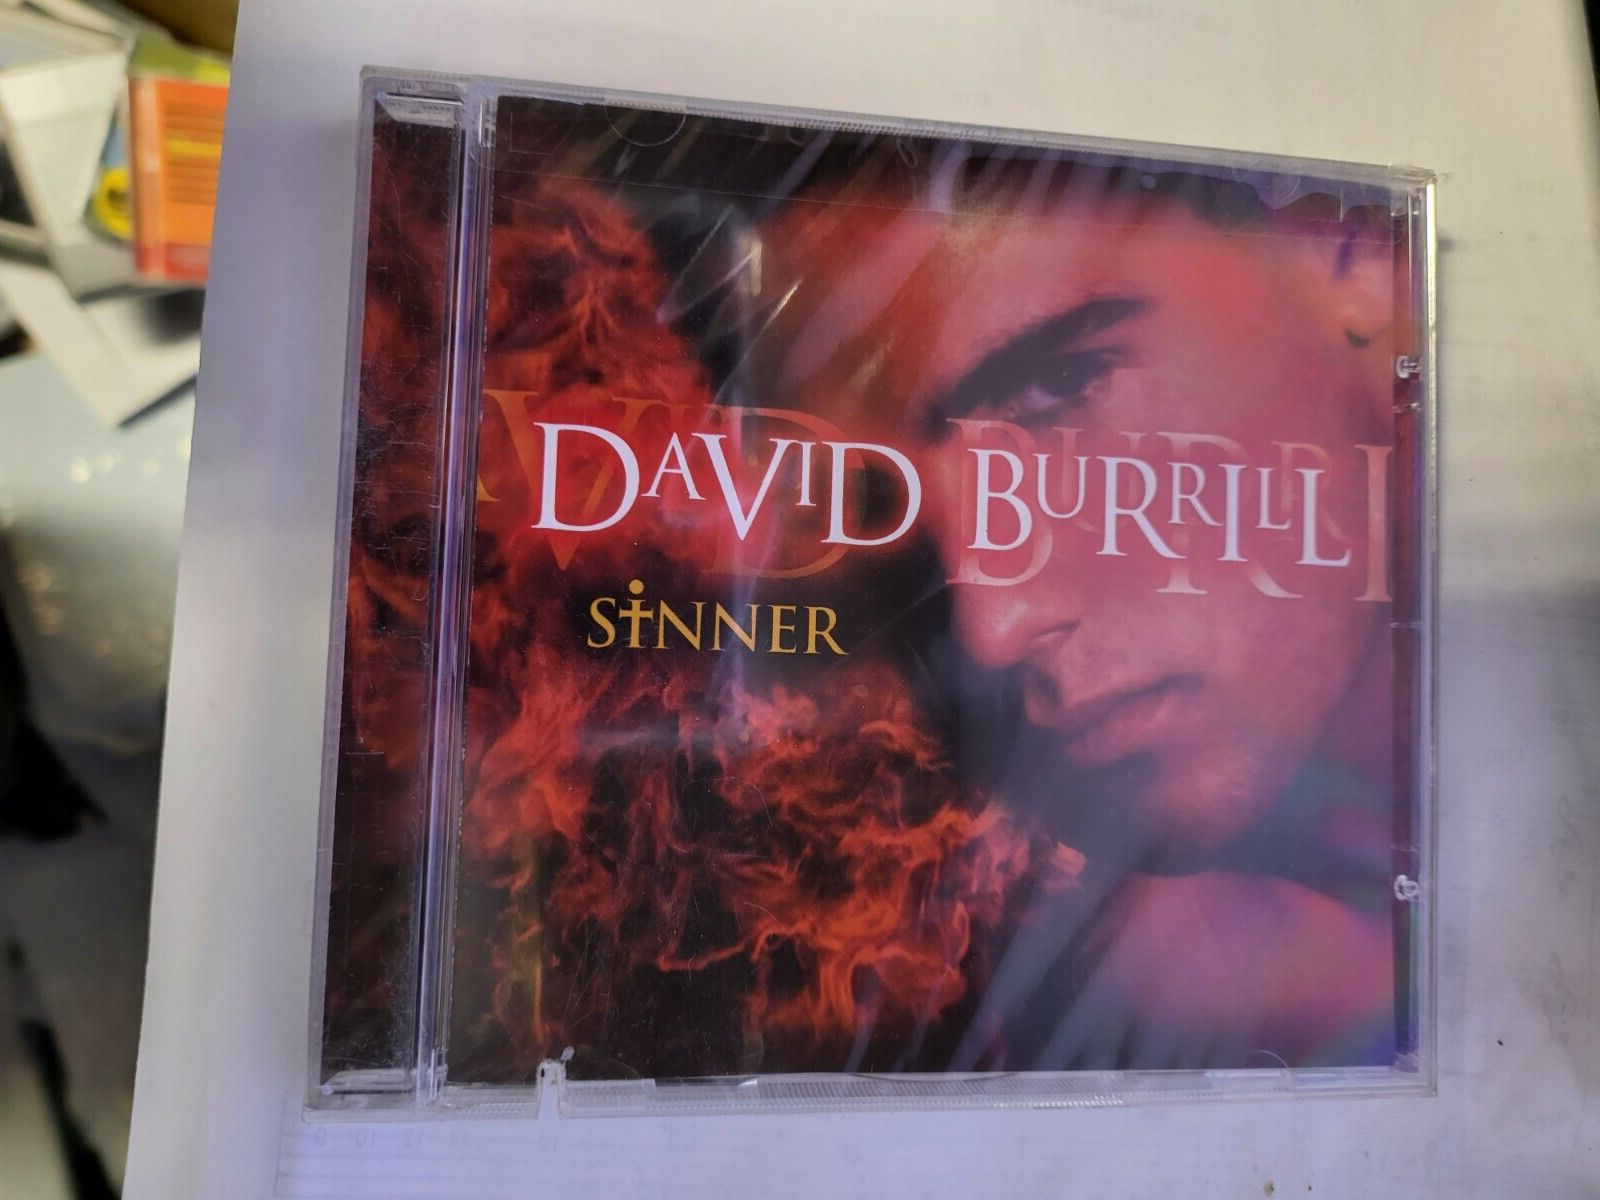 Primary image for Sinner by David Burrill (CD, 1999, eMpower) new sealed / promo cut by the side